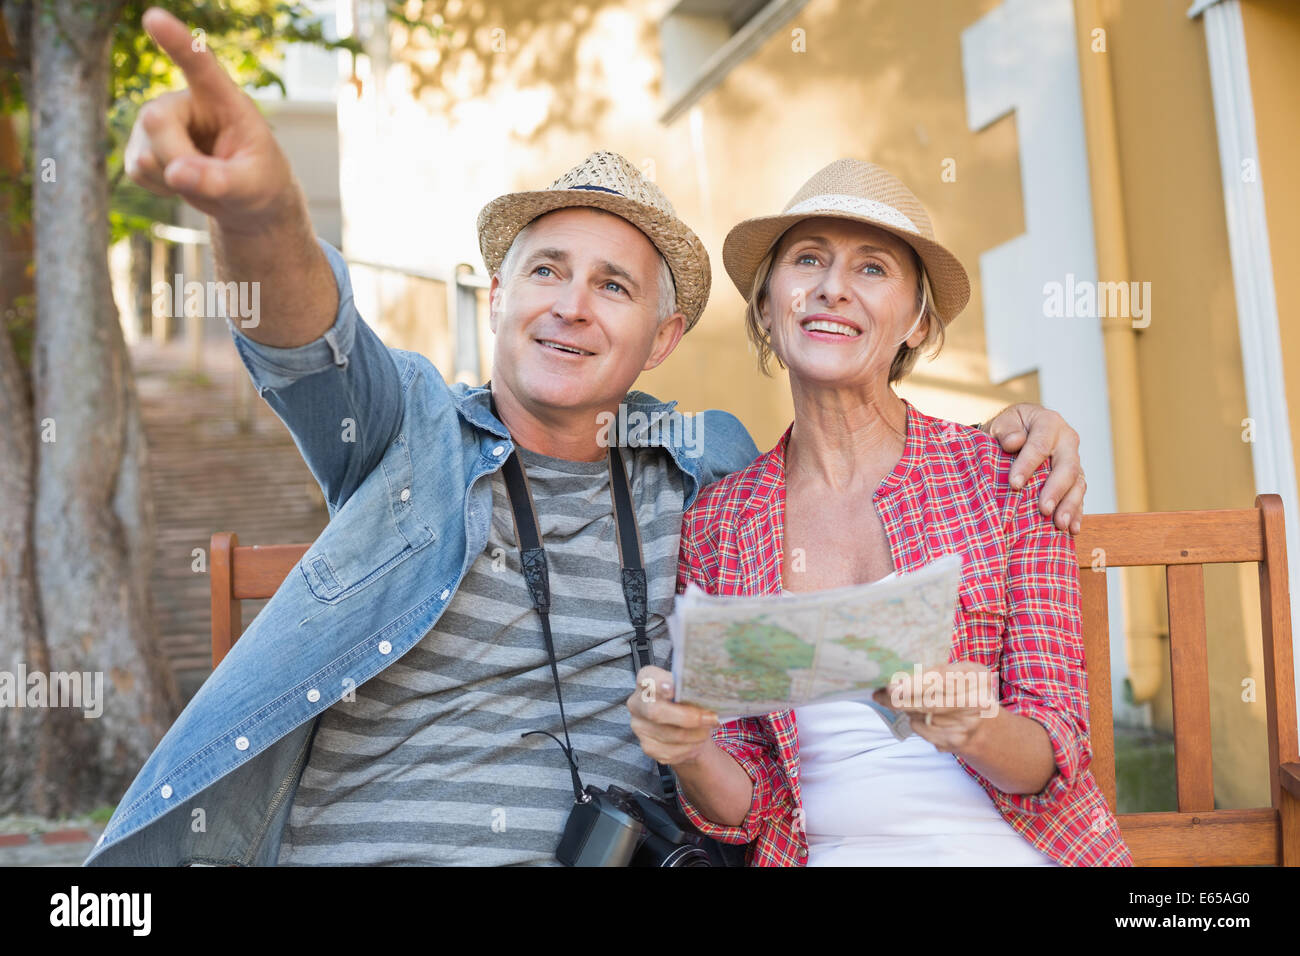 Happy tourist couple looking at map on a bench in the city Stock Photo